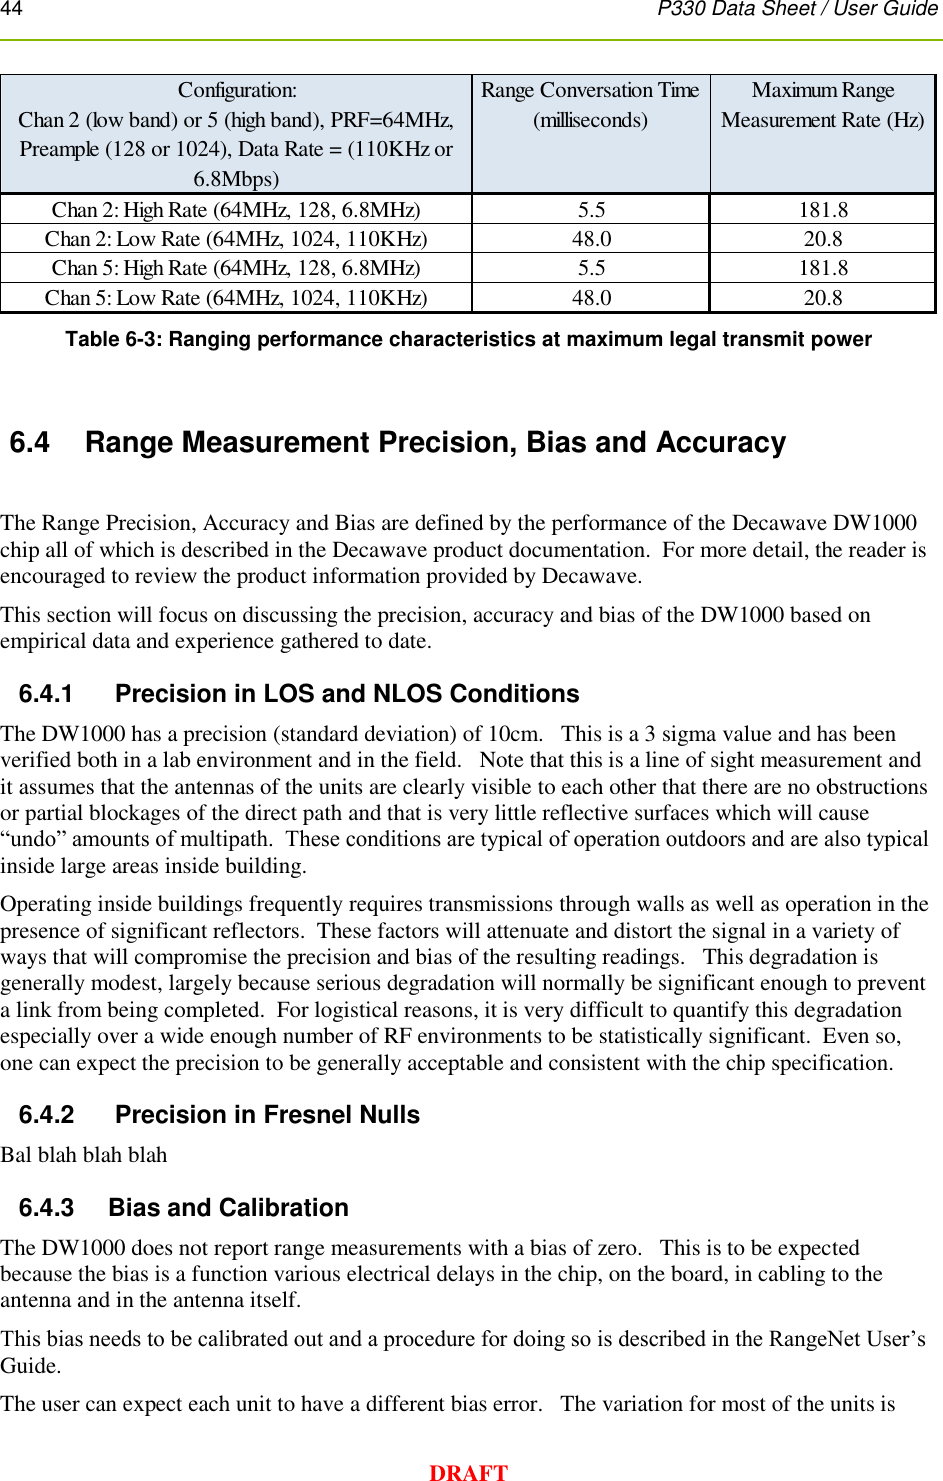 44      P330 Data Sheet / User Guide  DRAFT  Table 6-3: Ranging performance characteristics at maximum legal transmit power  6.4  Range Measurement Precision, Bias and Accuracy  The Range Precision, Accuracy and Bias are defined by the performance of the Decawave DW1000 chip all of which is described in the Decawave product documentation.  For more detail, the reader is encouraged to review the product information provided by Decawave. This section will focus on discussing the precision, accuracy and bias of the DW1000 based on empirical data and experience gathered to date.    6.4.1     Precision in LOS and NLOS Conditions   The DW1000 has a precision (standard deviation) of 10cm.   This is a 3 sigma value and has been verified both in a lab environment and in the field.   Note that this is a line of sight measurement and it assumes that the antennas of the units are clearly visible to each other that there are no obstructions or partial blockages of the direct path and that is very little reflective surfaces which will cause “undo” amounts of multipath.  These conditions are typical of operation outdoors and are also typical inside large areas inside building. Operating inside buildings frequently requires transmissions through walls as well as operation in the presence of significant reflectors.  These factors will attenuate and distort the signal in a variety of ways that will compromise the precision and bias of the resulting readings.   This degradation is generally modest, largely because serious degradation will normally be significant enough to prevent a link from being completed.  For logistical reasons, it is very difficult to quantify this degradation especially over a wide enough number of RF environments to be statistically significant.  Even so, one can expect the precision to be generally acceptable and consistent with the chip specification. 6.4.2     Precision in Fresnel Nulls   Bal blah blah blah 6.4.3    Bias and Calibration The DW1000 does not report range measurements with a bias of zero.   This is to be expected because the bias is a function various electrical delays in the chip, on the board, in cabling to the antenna and in the antenna itself.  This bias needs to be calibrated out and a procedure for doing so is described in the RangeNet User’s Guide. The user can expect each unit to have a different bias error.   The variation for most of the units is Configuration:                                                              Chan 2 (low band) or 5 (high band), PRF=64MHz, Preample (128 or 1024), Data Rate = (110KHz or 6.8Mbps)Range Conversation Time (milliseconds)Maximum Range Measurement Rate (Hz)Chan 2: High Rate (64MHz, 128, 6.8MHz) 5.5 181.8Chan 2: Low Rate (64MHz, 1024, 110KHz) 48.0 20.8Chan 5: High Rate (64MHz, 128, 6.8MHz) 5.5 181.8Chan 5: Low Rate (64MHz, 1024, 110KHz) 48.0 20.8